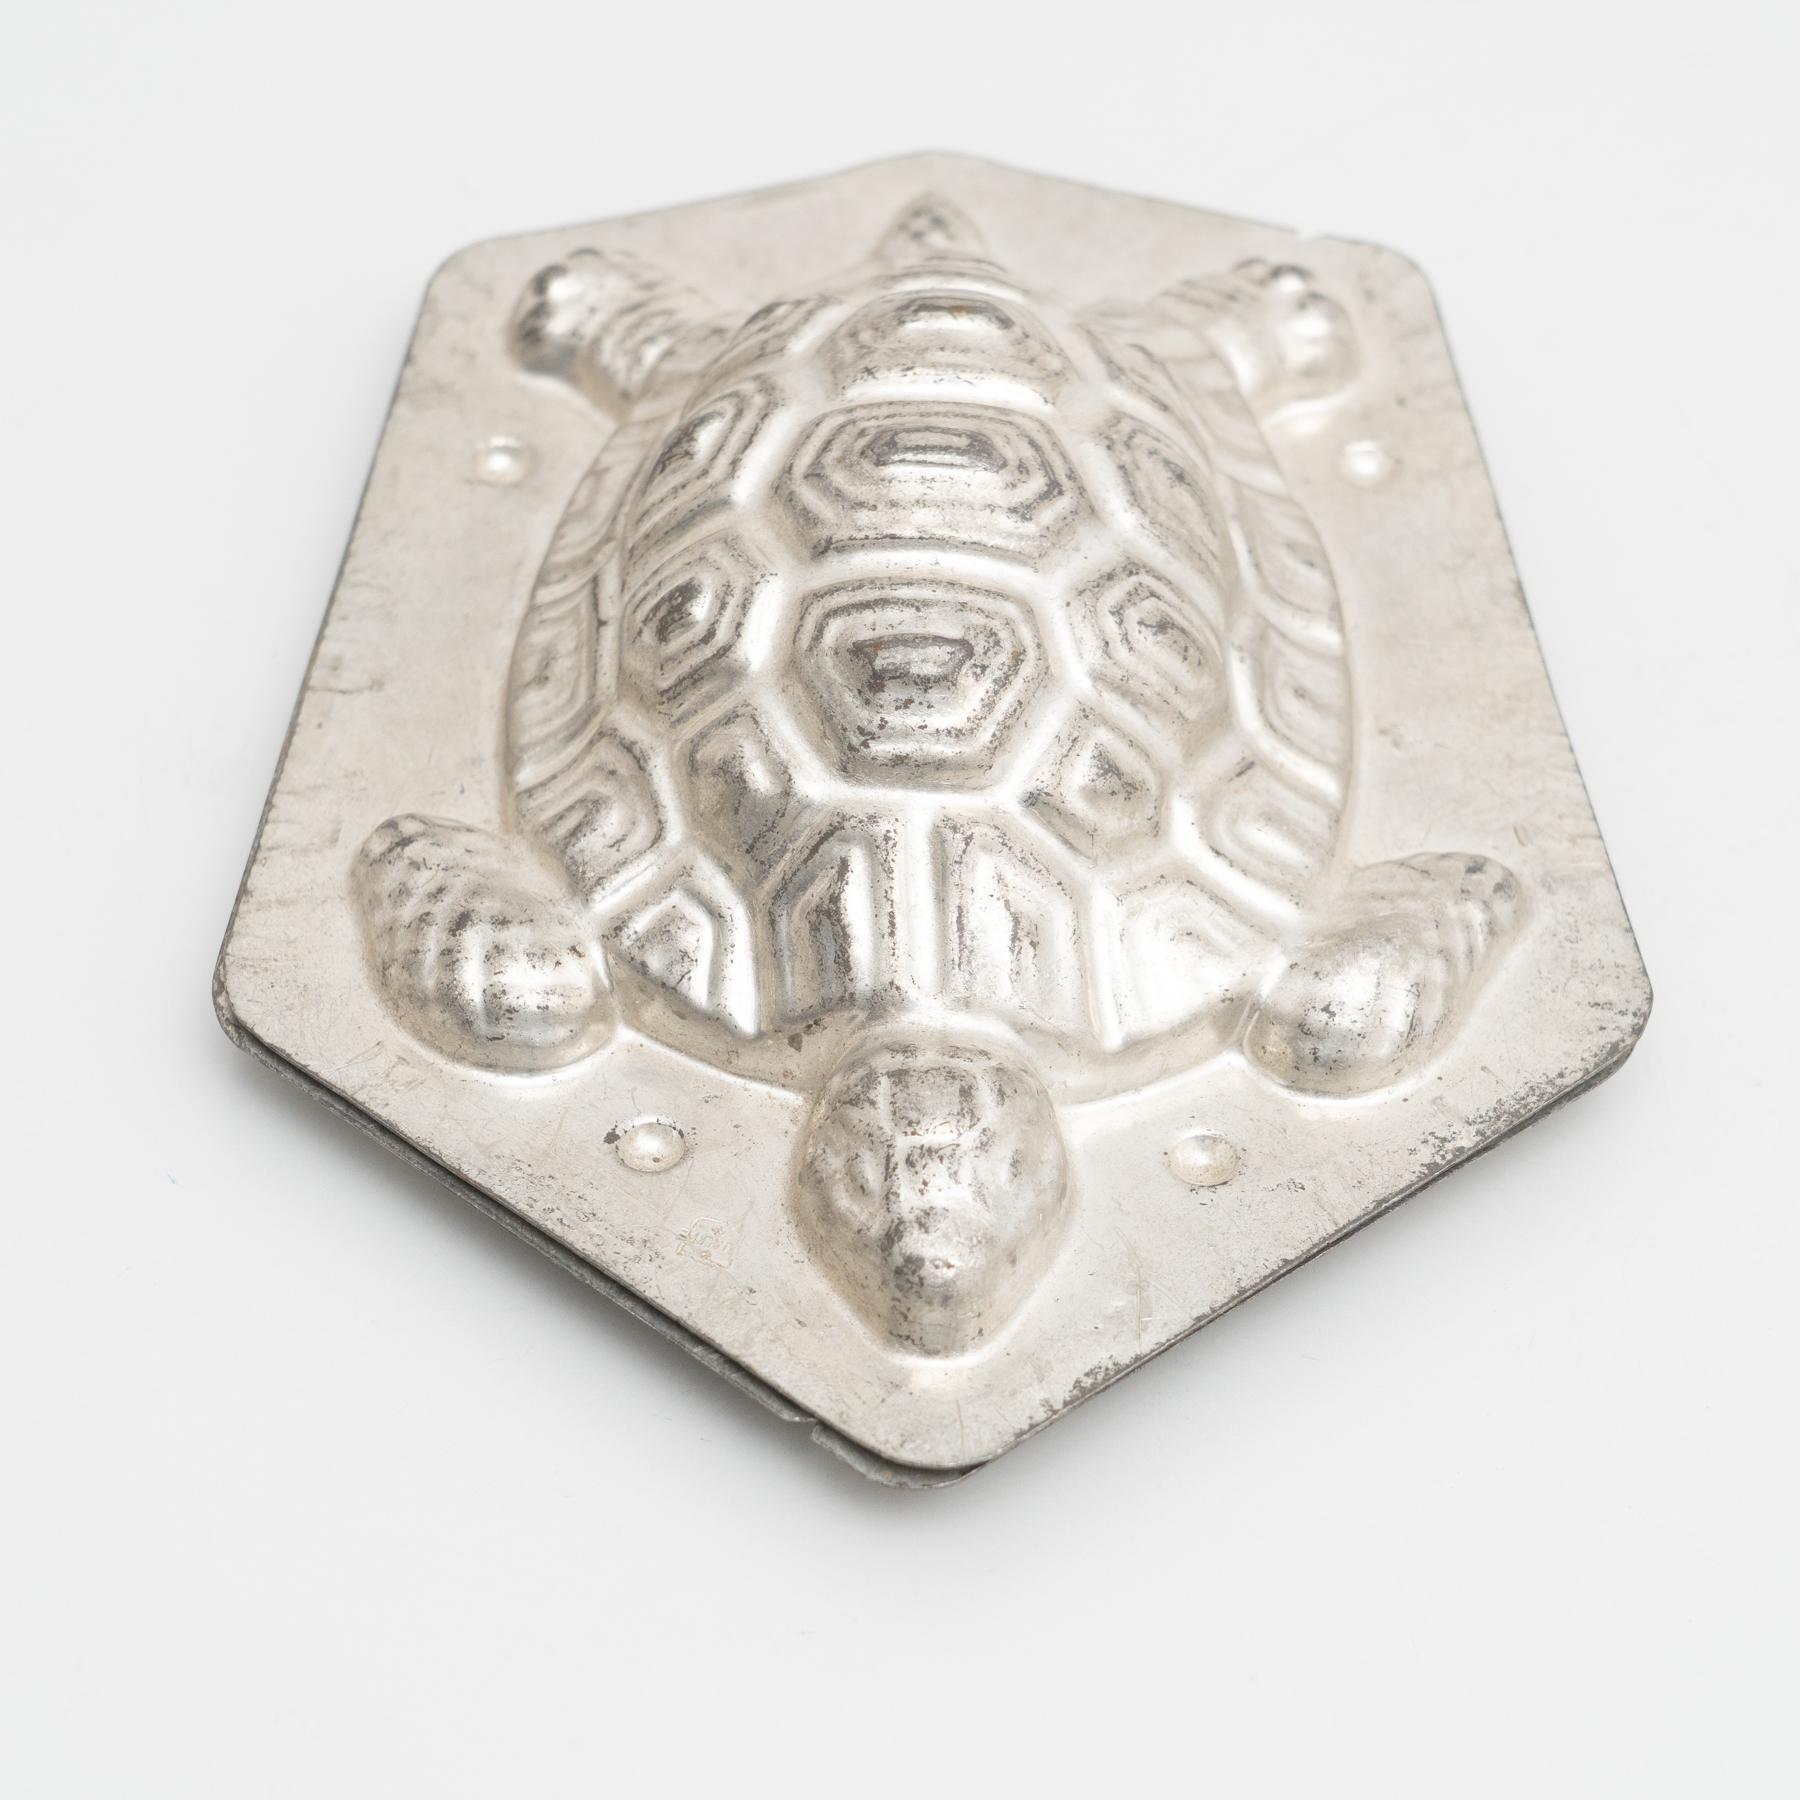 Antique Turtle Shaped Metal Cooking Mold, circa 1950 For Sale 8